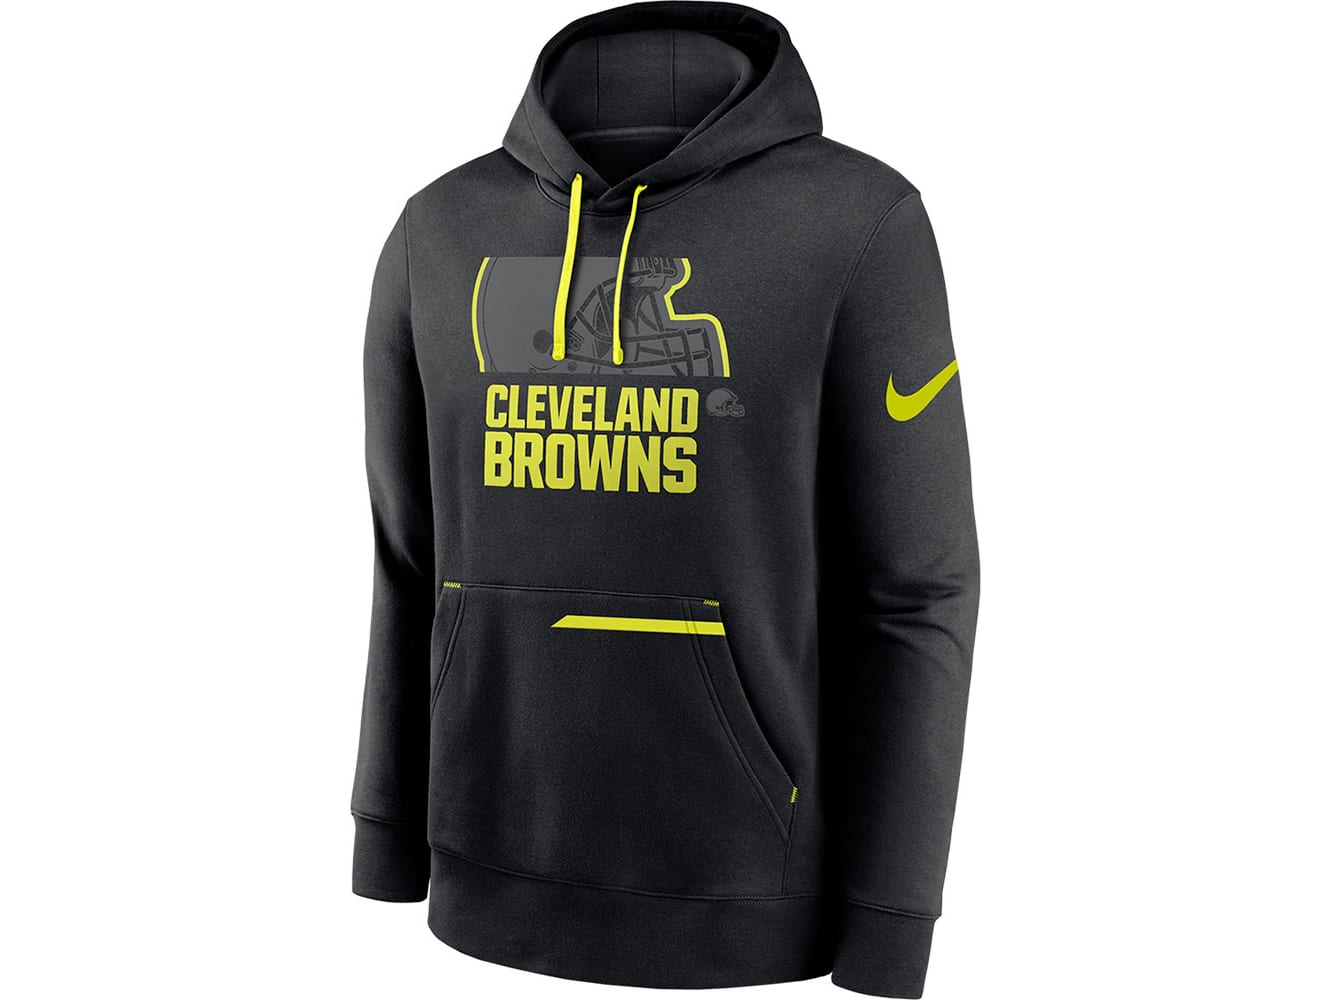 Cleveland Browns Apparel